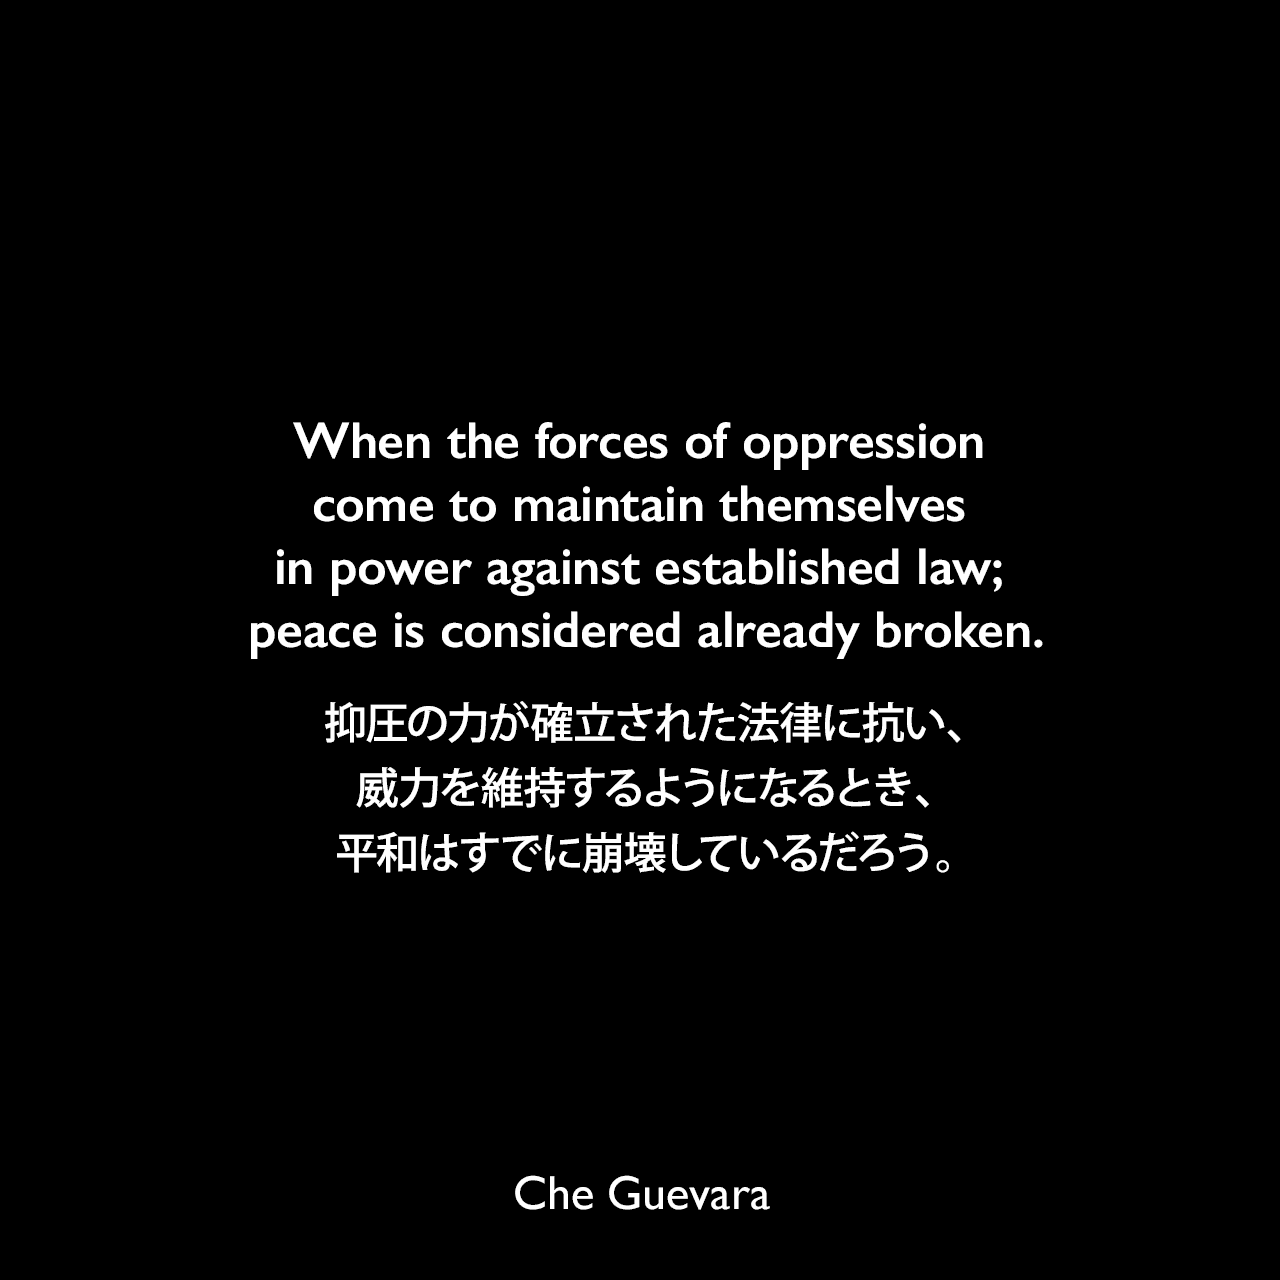 When the forces of oppression come to maintain themselves in power against established law; peace is considered already broken.抑圧の力が確立された法律に抗い、威力を維持するようになるとき、平和はすでに崩壊しているだろう。- チェ・ゲバラによる本「Guerrilla Warfare a manual（ゲリラ戦争）」よりChe Guevara